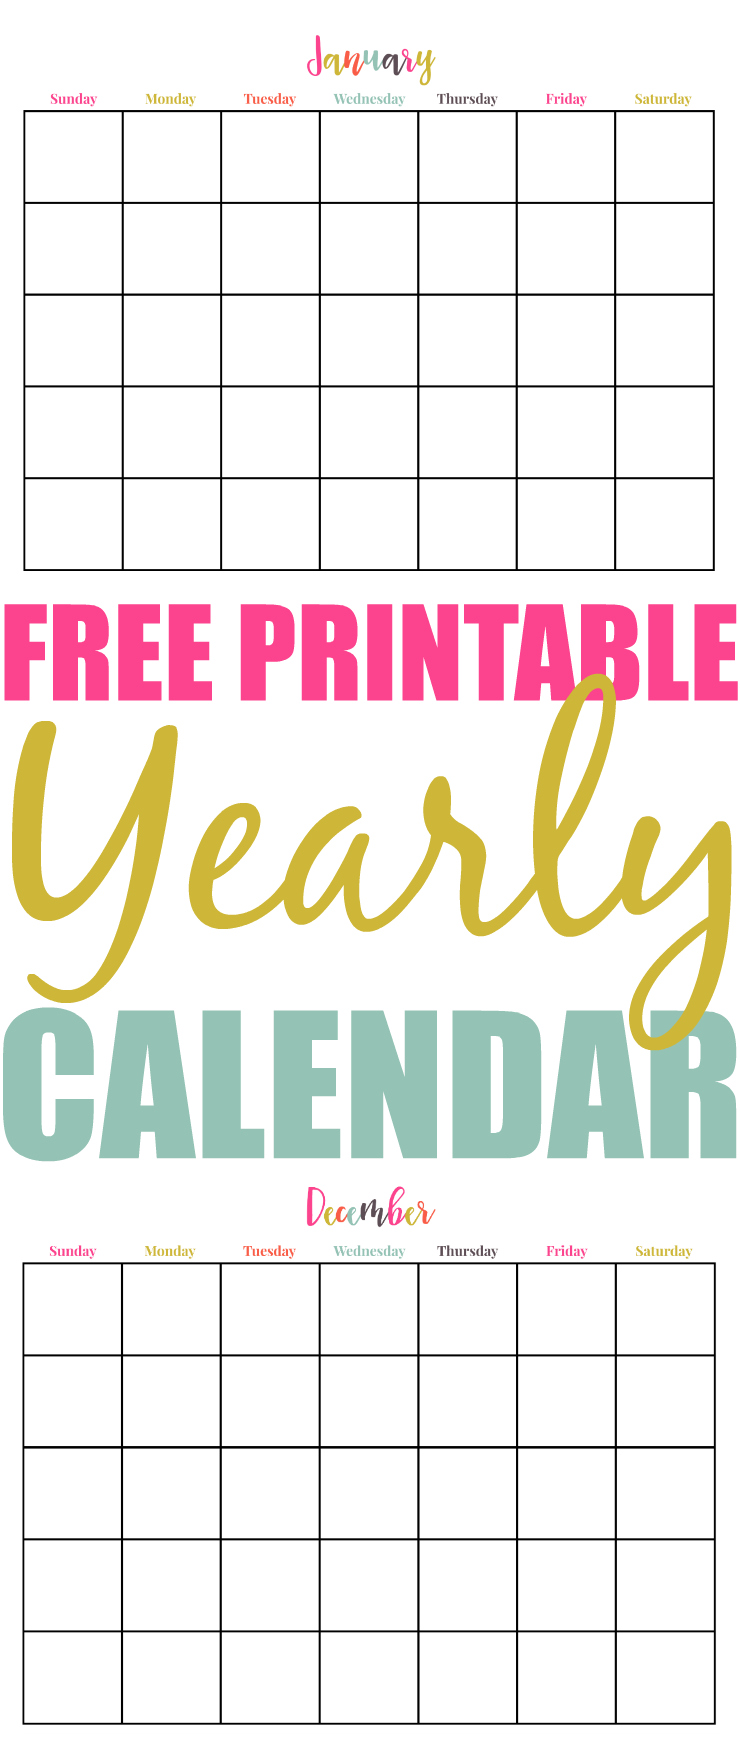 Free Printable Yearly Calendar Extreme Couponing Mom